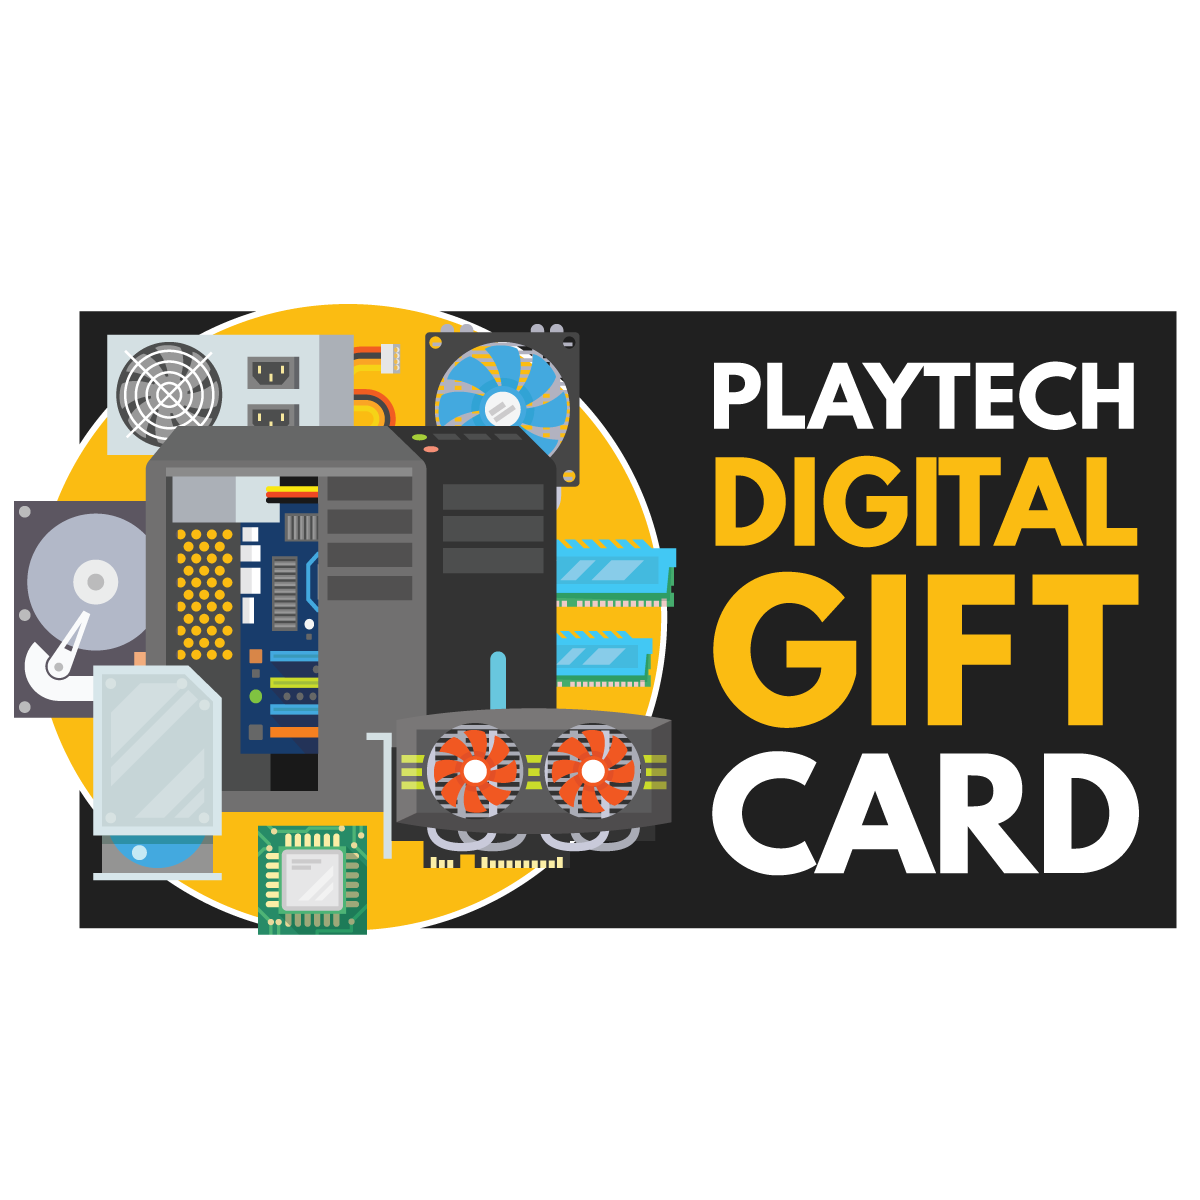 Playtech Gift Cards $20 - Digital Delivery Only - Playtech